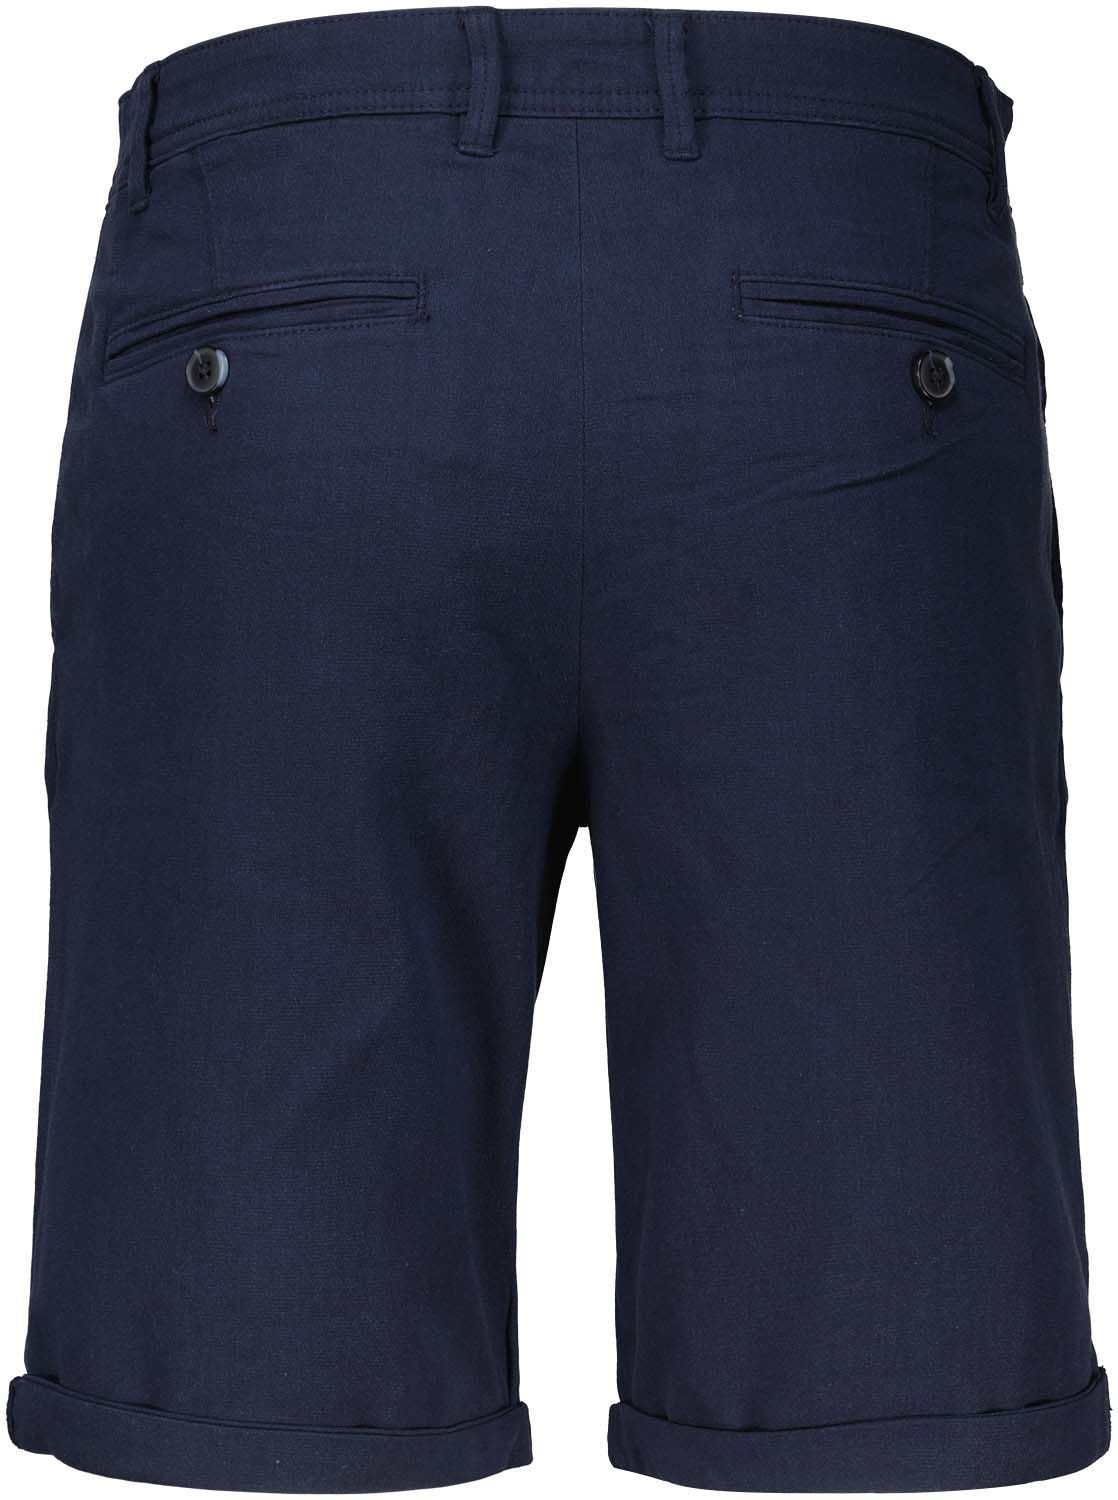 Selected Homme Short Blauw